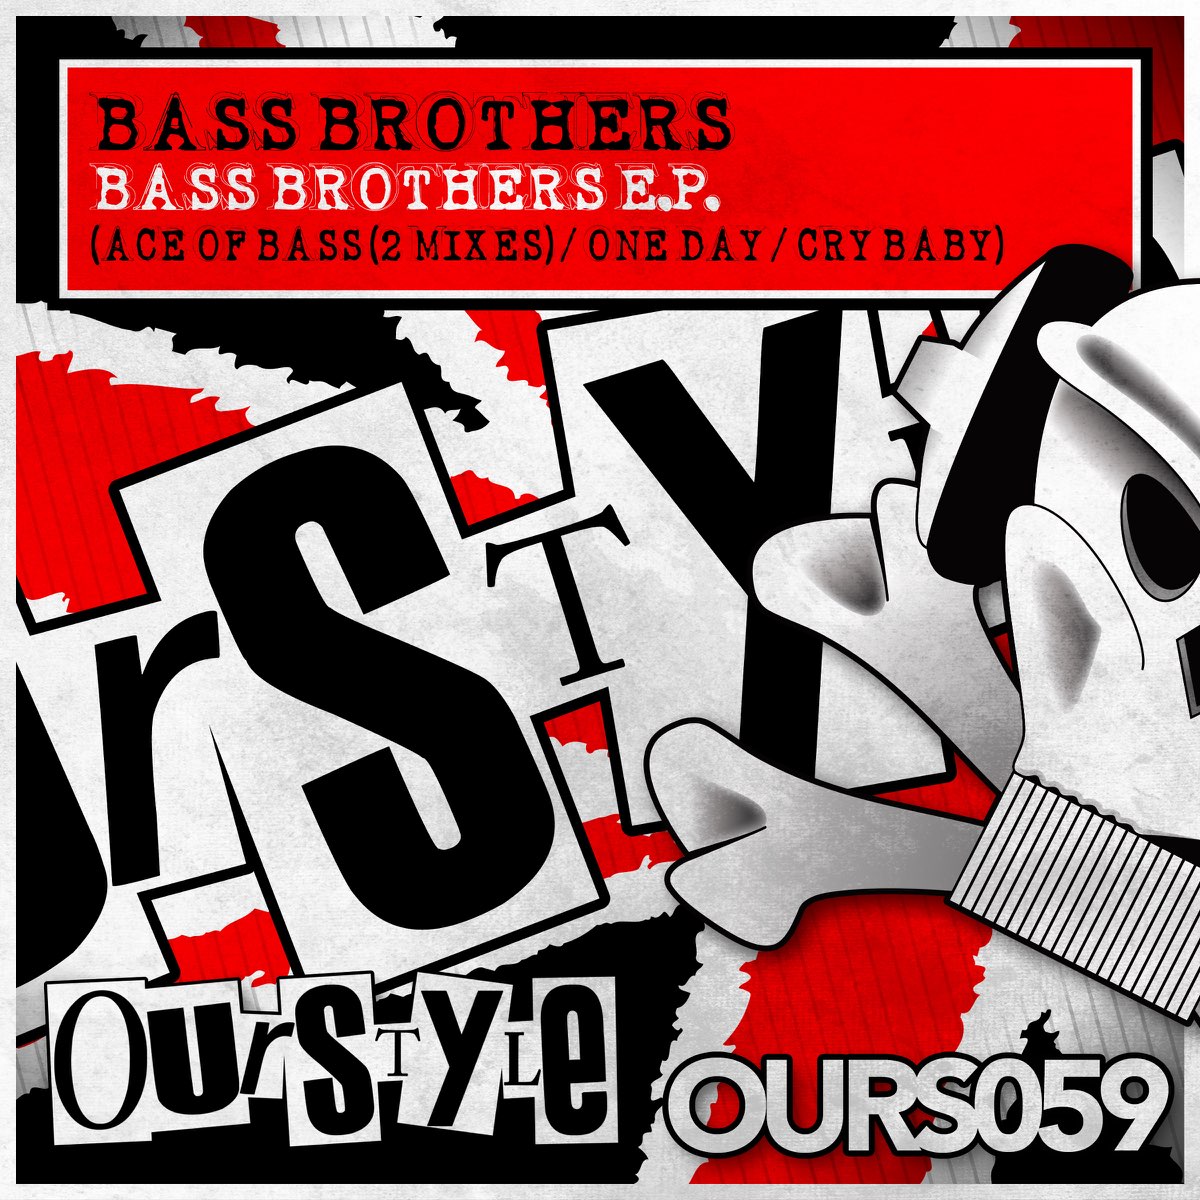 Brother bass